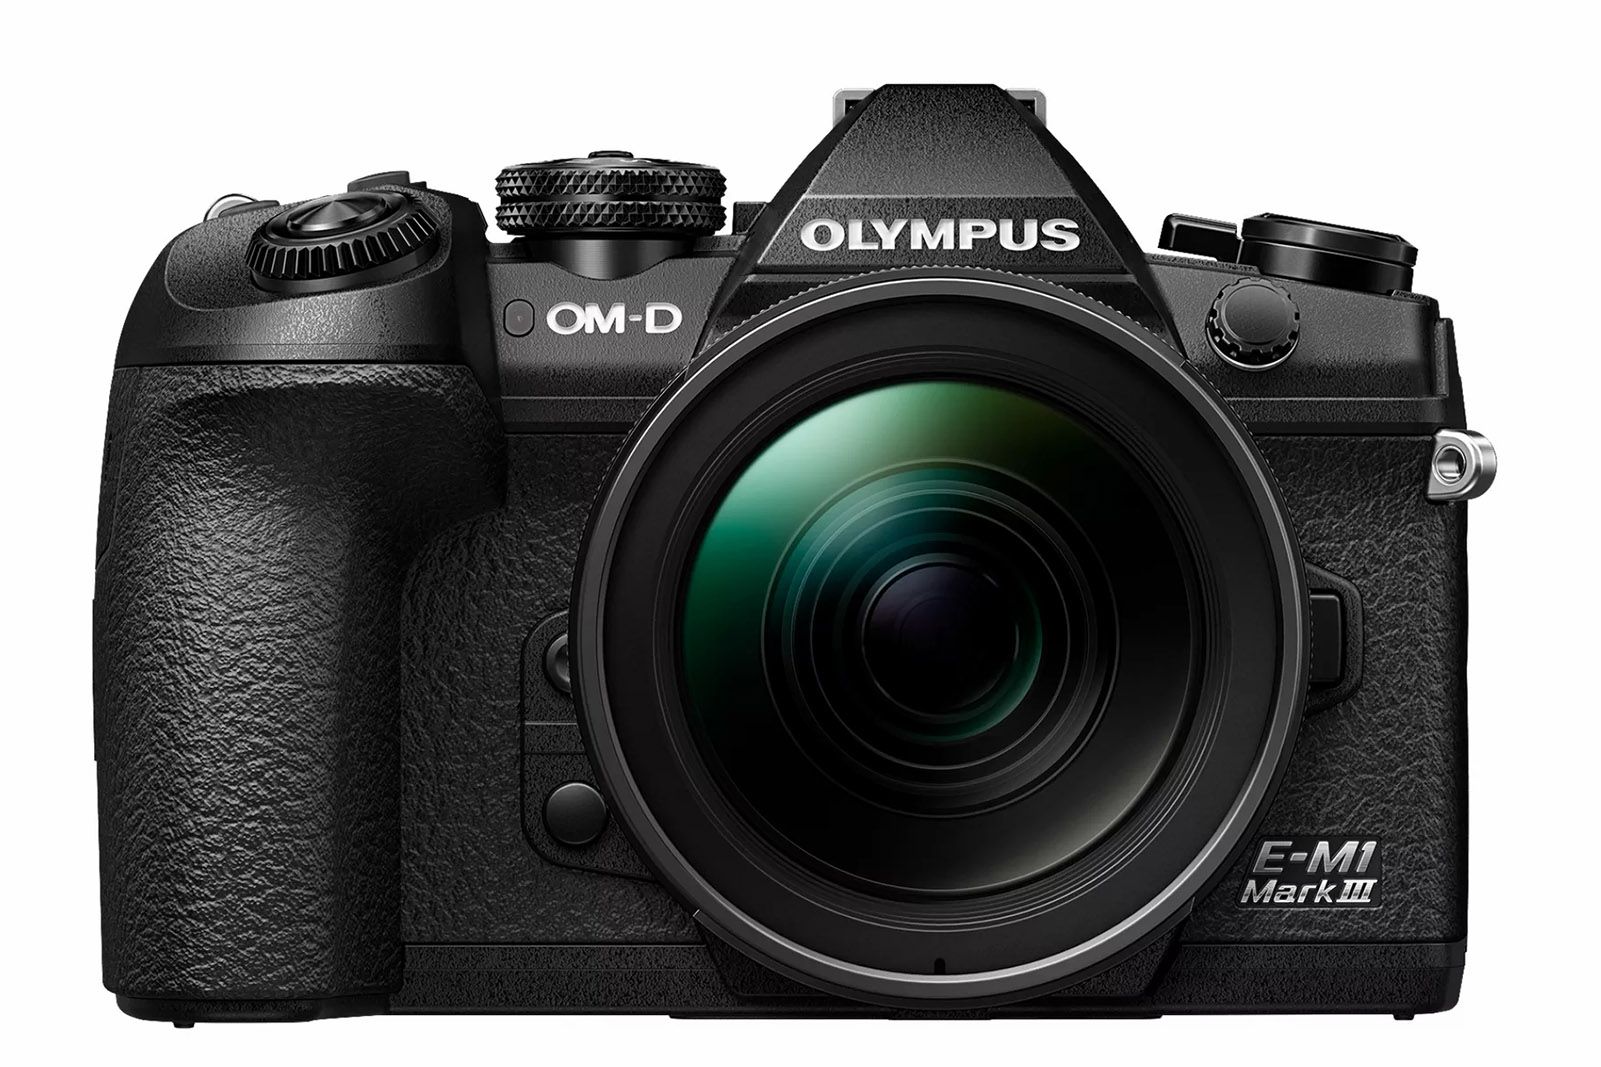 Olympus OM-D E-M1 takes compact pro photography to new heights image 1